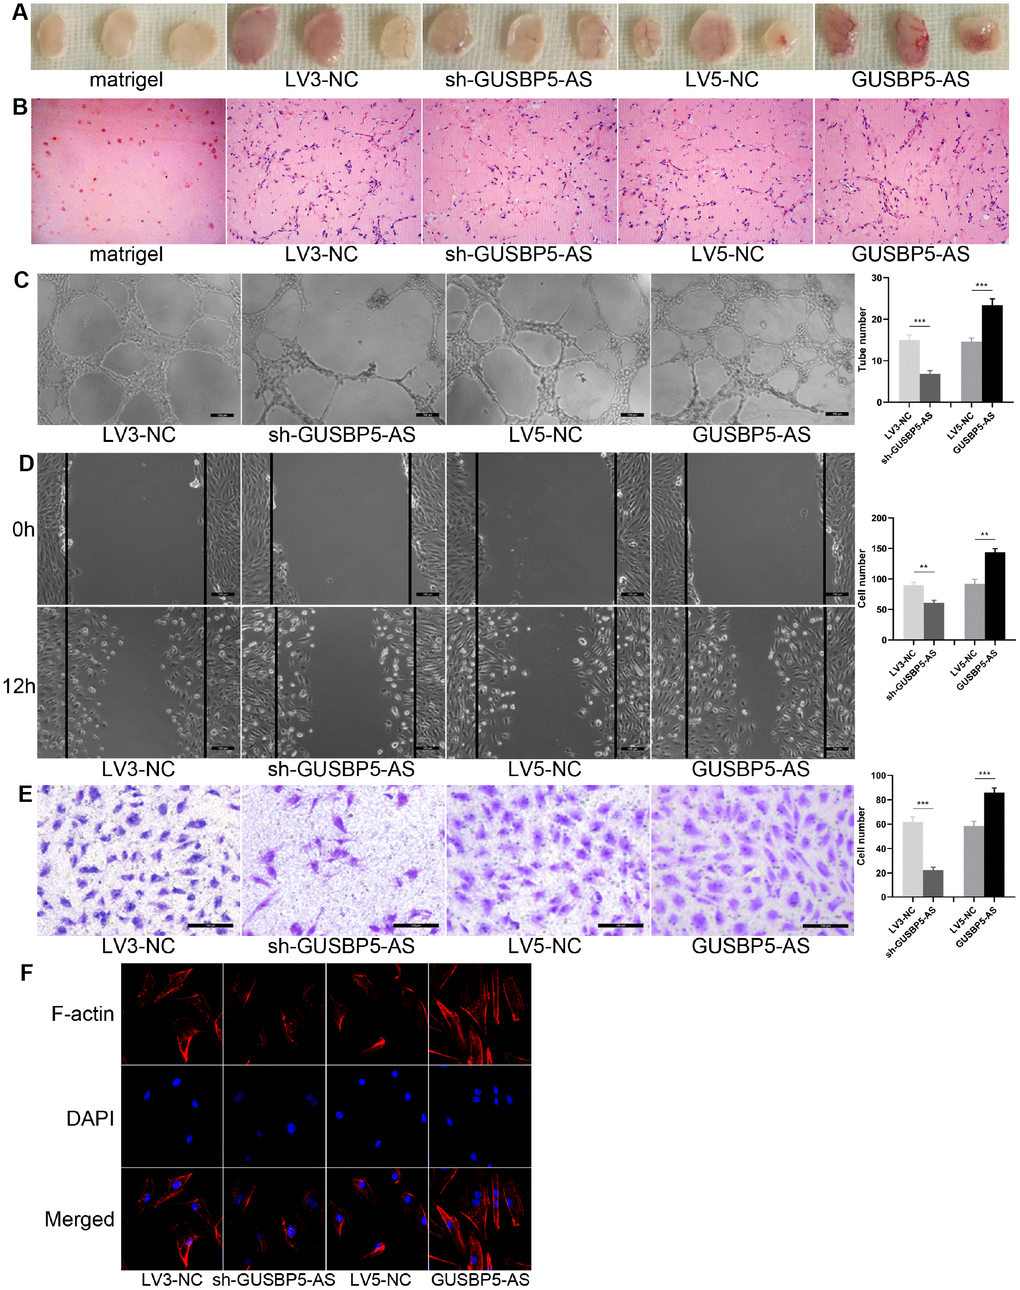 Effects of lncRNA GUSBP5-AS on angiogenesis of EPCs in vivo and in vitro, EPC migration and invasion. (A) In vivo angiogenesis was evaluated at Day 7 after subcutaneous injection of Matrigel-mixed EPCs into nude mice. (B) HE staining: lncRNA GUSBP5-AS knockdown and overexpression, respectively, decreased and increased tube formation by EPCs in vivo (original magnification, ×200). (C) In vitro tube formation assay. Scale bar=100μm. (original magnification, ×100). LncRNA GUSBP5-AS knockdown and overexpression, respectively, decreased and increased tube number. ***PD) Wound healing assay showing the effects of lncRNA GUSBP5-AS on EPC migration. Scale bar=100μm. (original magnification, ×100). LncRNA GUSBP5-AS knockdown and overexpression, respectively, decreased and increased cell migration in EPCs. **PE) Effects of lncRNA GUSBP5-AS on cell invasion ability were analysed. Scale bar=100μm. (original magnification, ×200). Data are represented as mean ± SEM. ***PF) Effect of lncRNA GUSBP5-AS on actin cytoskeleton structure in cultured EPCs. Cells were fixed, permeabilized, stained with rhodamine–phalloidin and DAPI, and visualized by confocal microscopy; down-regulation of GUSBP5-AS impaired F-actin while GUSBP5-AS overexpression prevented disruption of actin cytoskeletal structure.